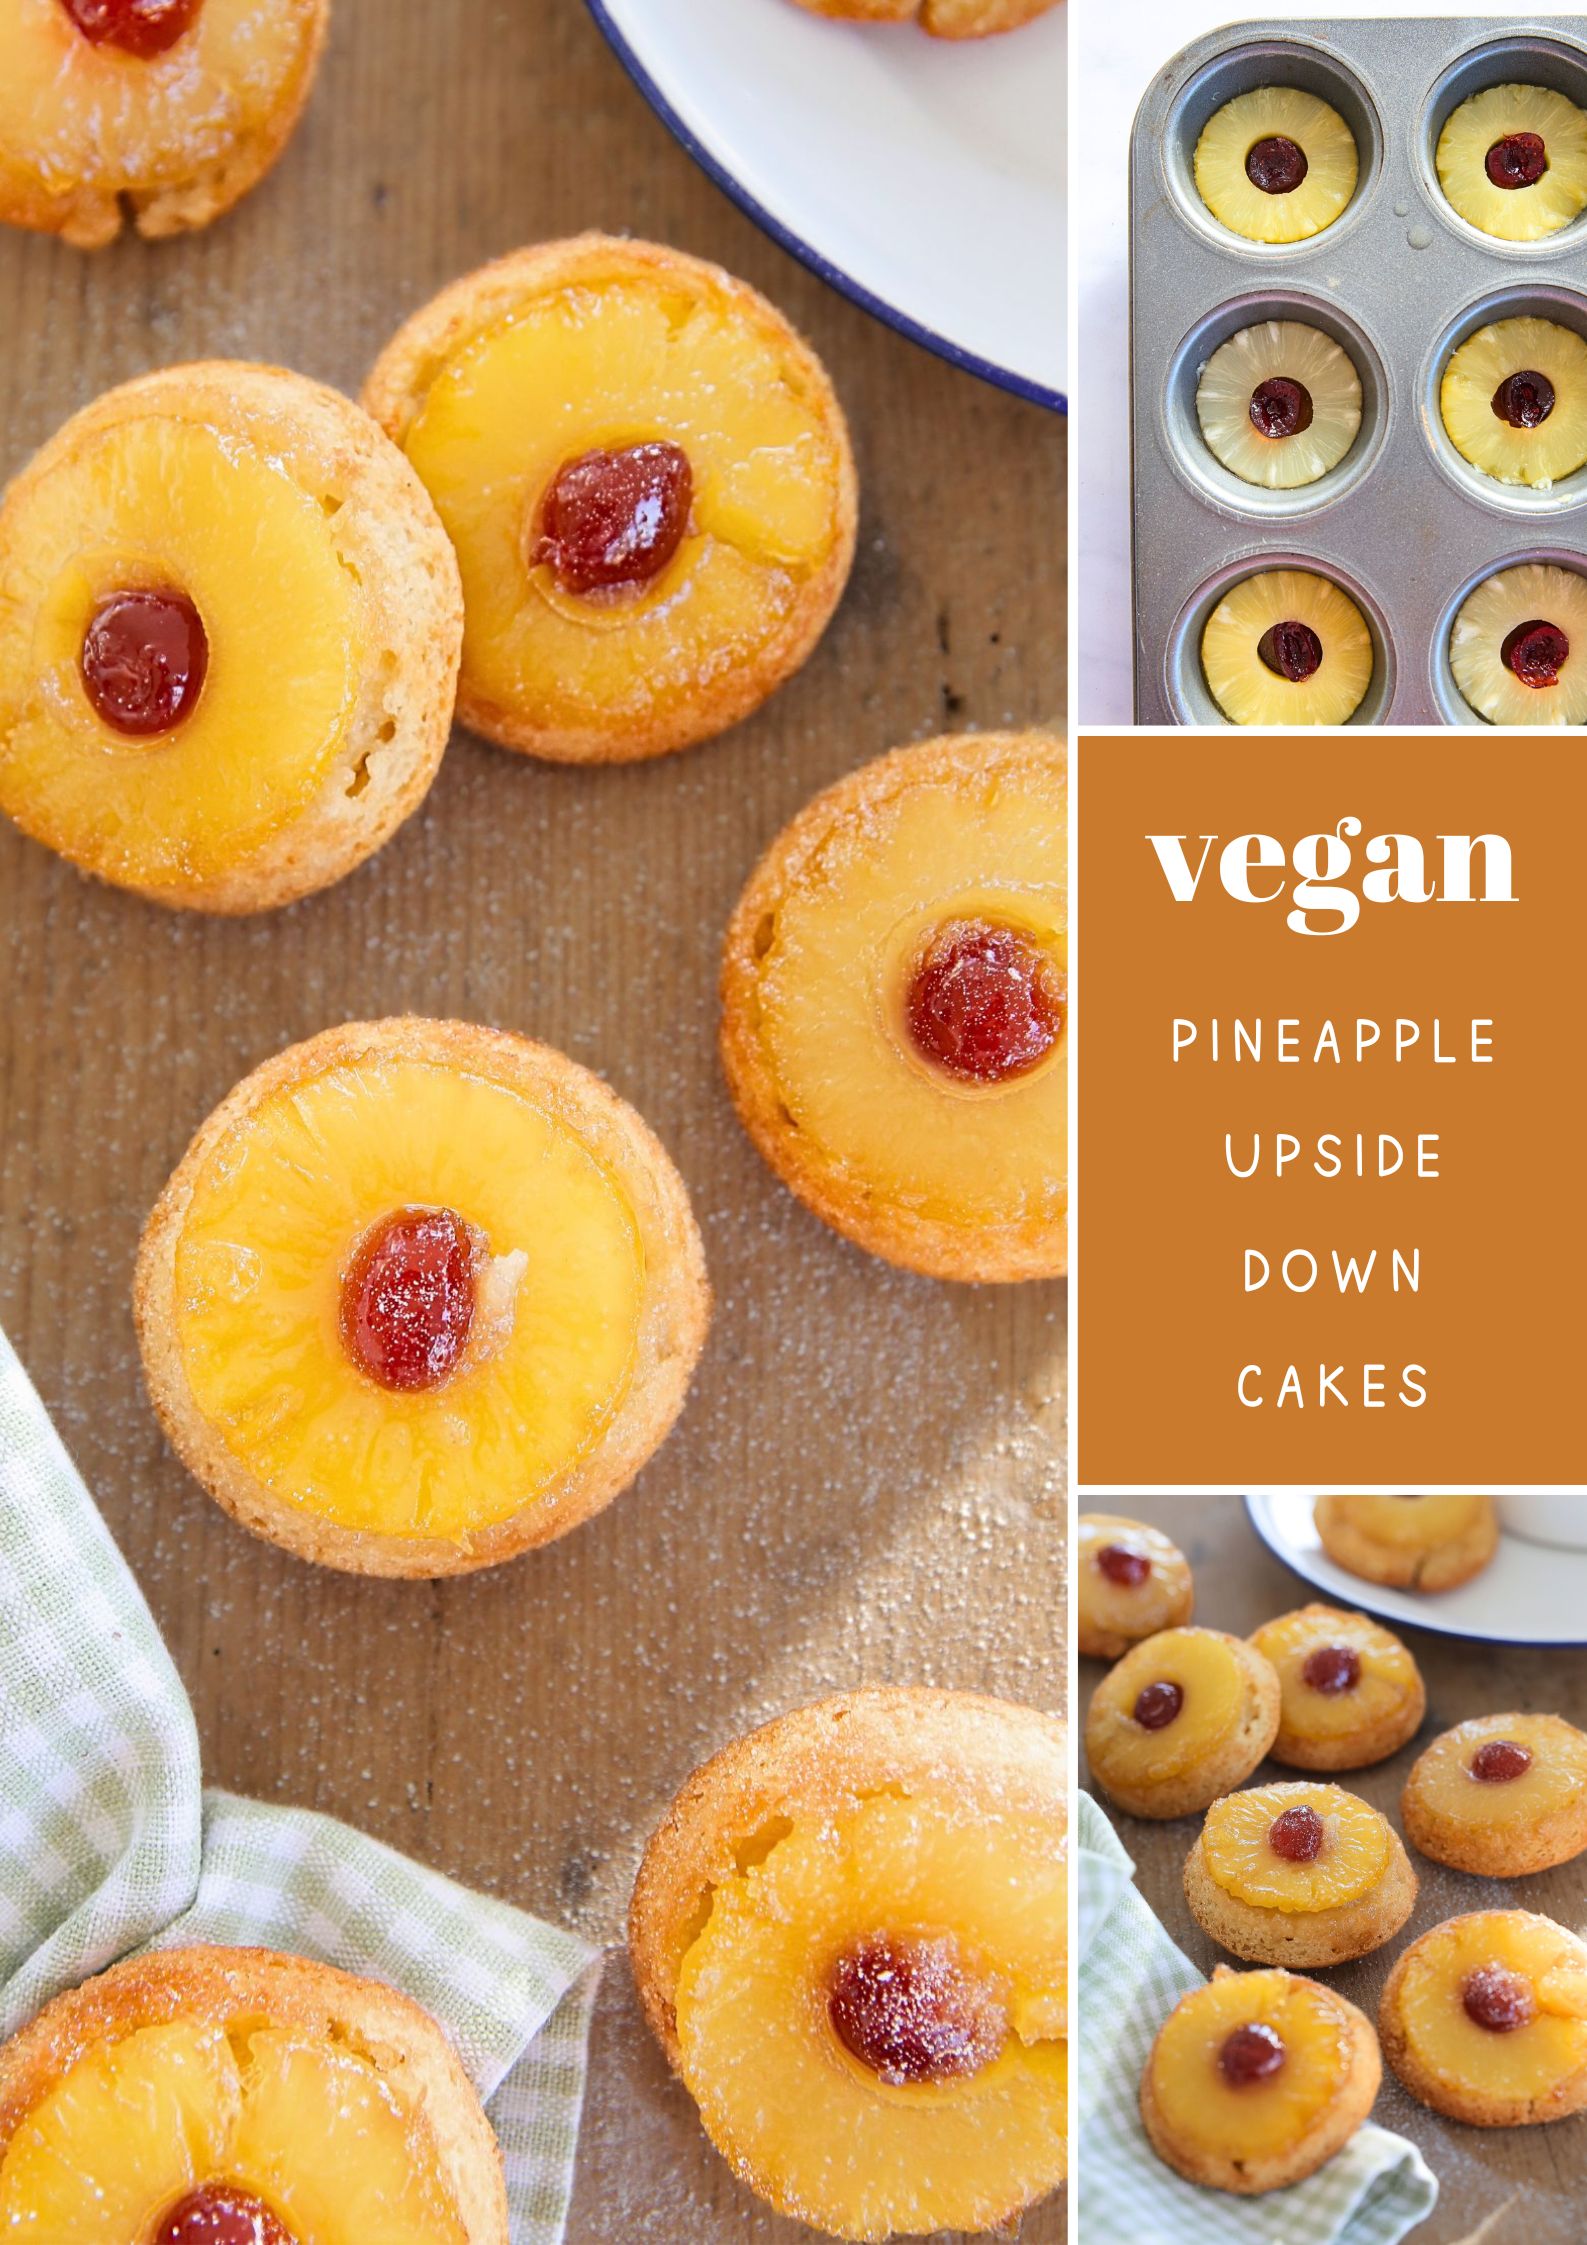 A classic for a reason, these mini vegan pineapple upside down cakes still have that sugary caramel crust, fruity pineapple, amber cherries and the easiest vegan cake mix! #pineappleupsidedowncake #pineapplecake #vegancake #eggfreecake #pineapplerecipes